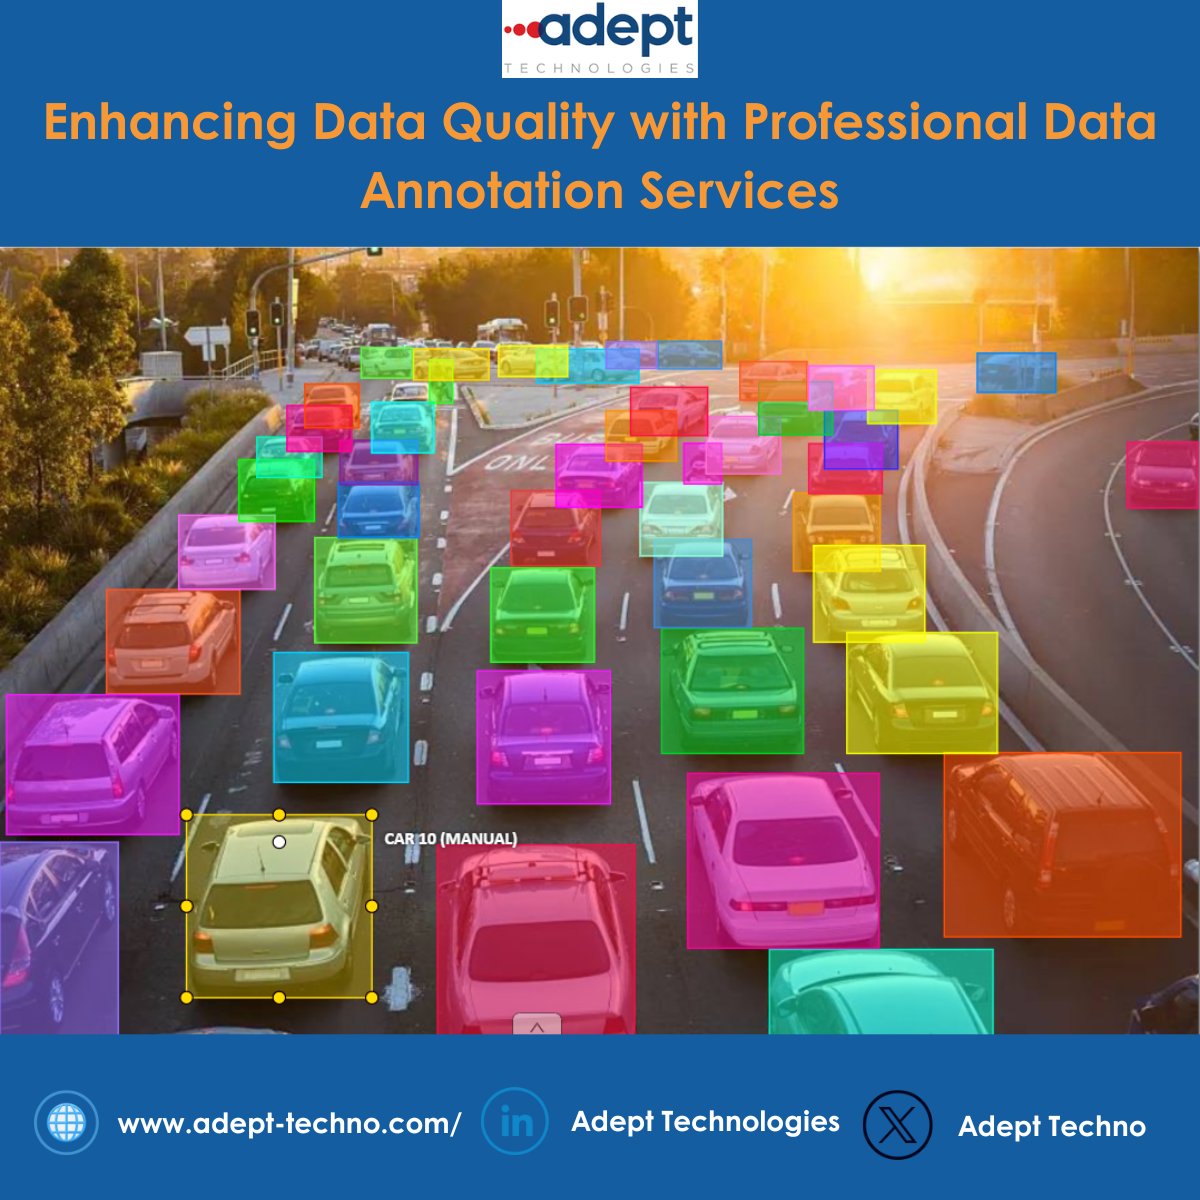 As you may know, data annotation is a vital step in preparing and labeling your datasets, ensuring accurate and meaningful insights. That's where Adept Technologies come in. Contact us today for a discussion on elevating the success of your machine learning and artificial